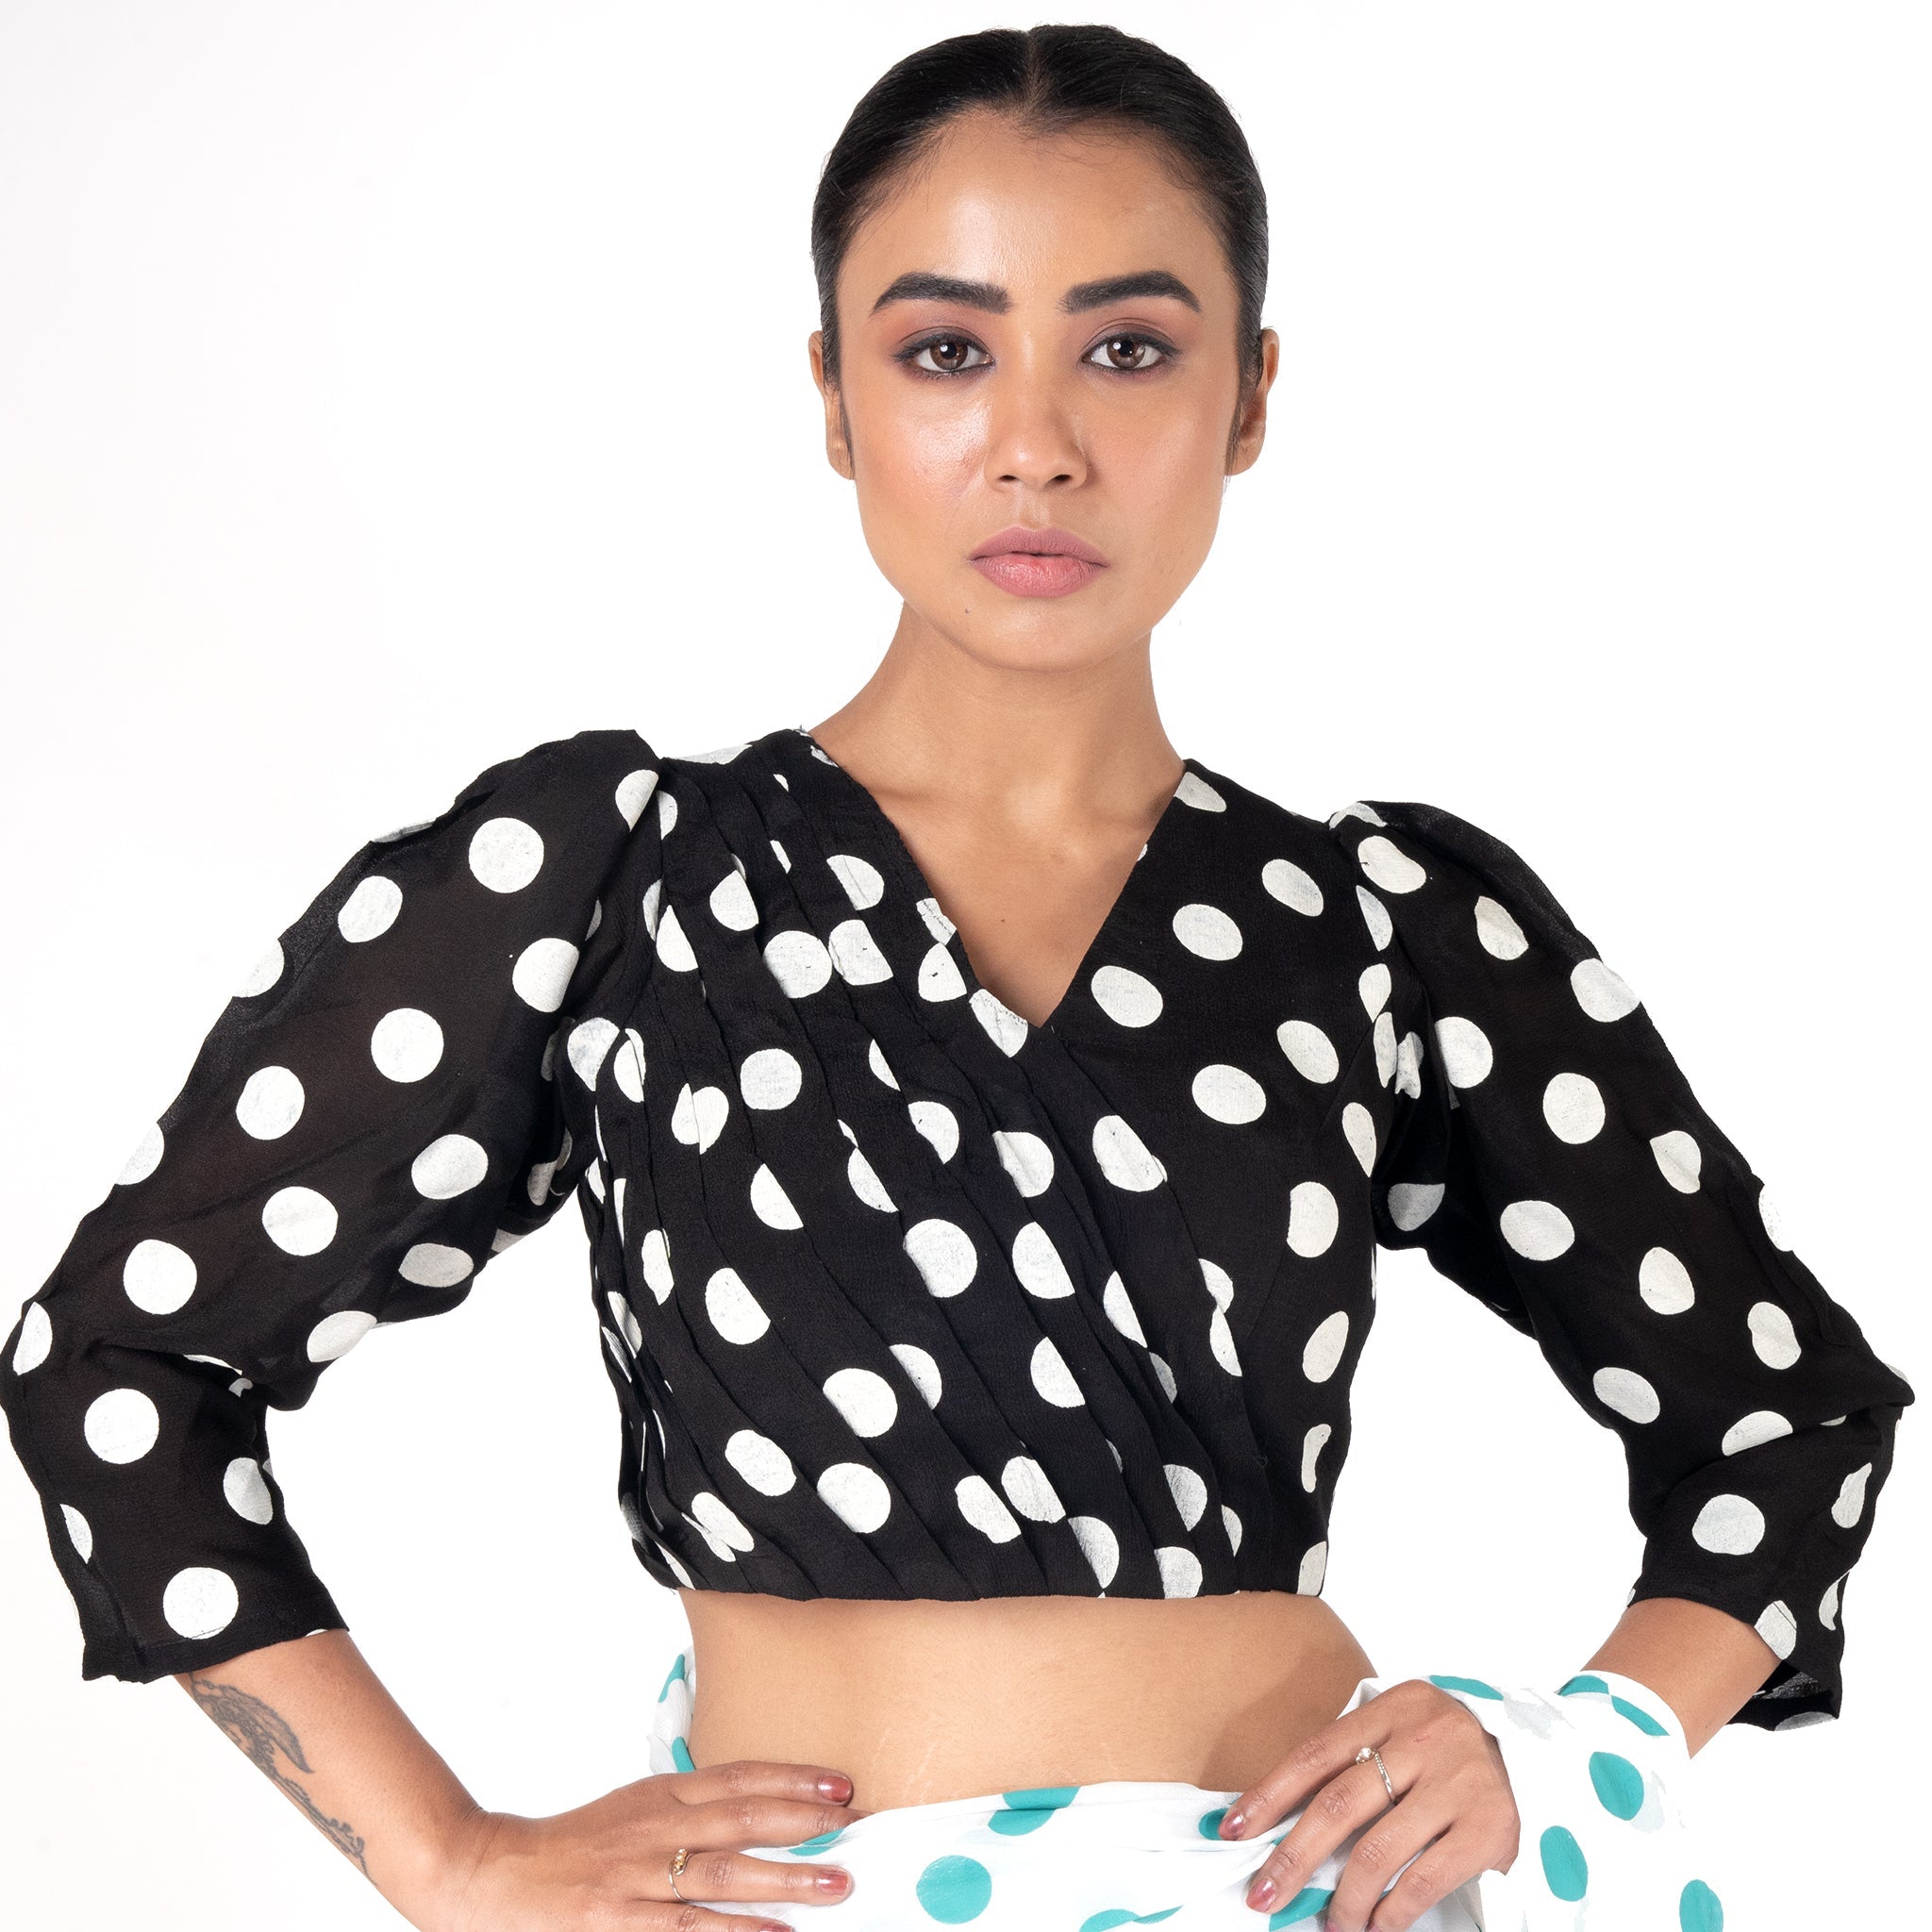 Women's Black Polka Dotted Front Side Pleadted Padded Chiffon Blouse - Boveee